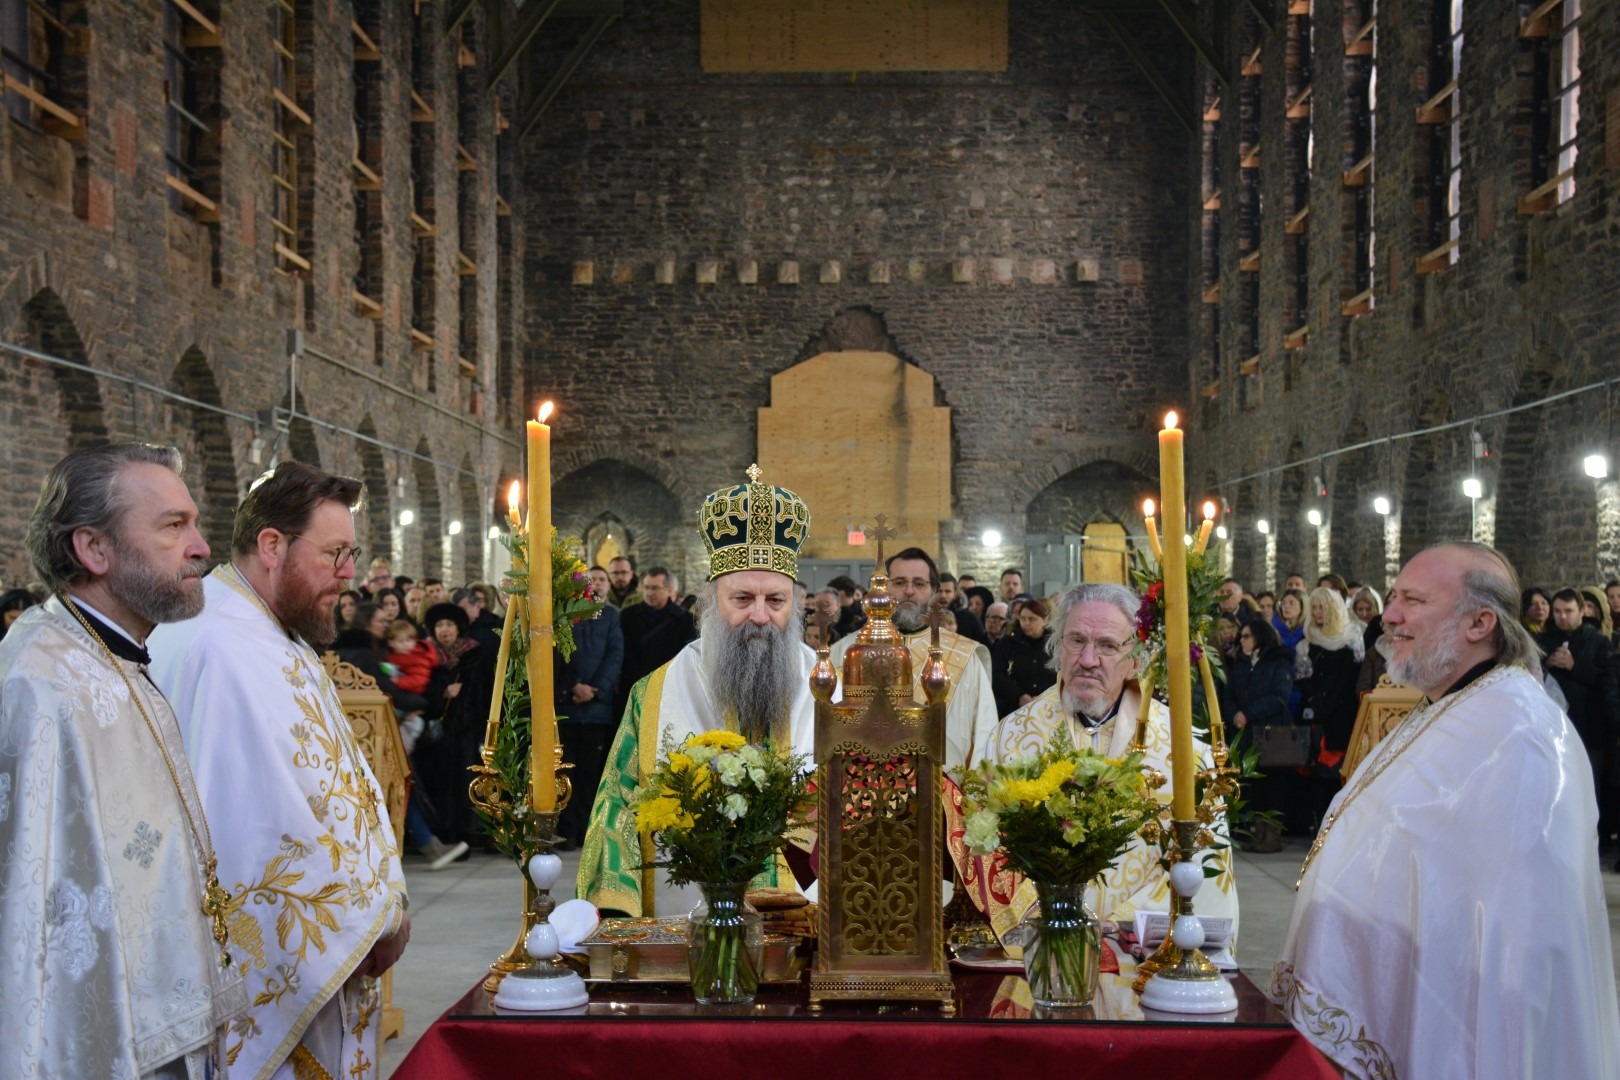 Photographs and a video from the First Divine Liturgy at Saint Sava Cathedral After the Devastating Fire from Seven years Ago